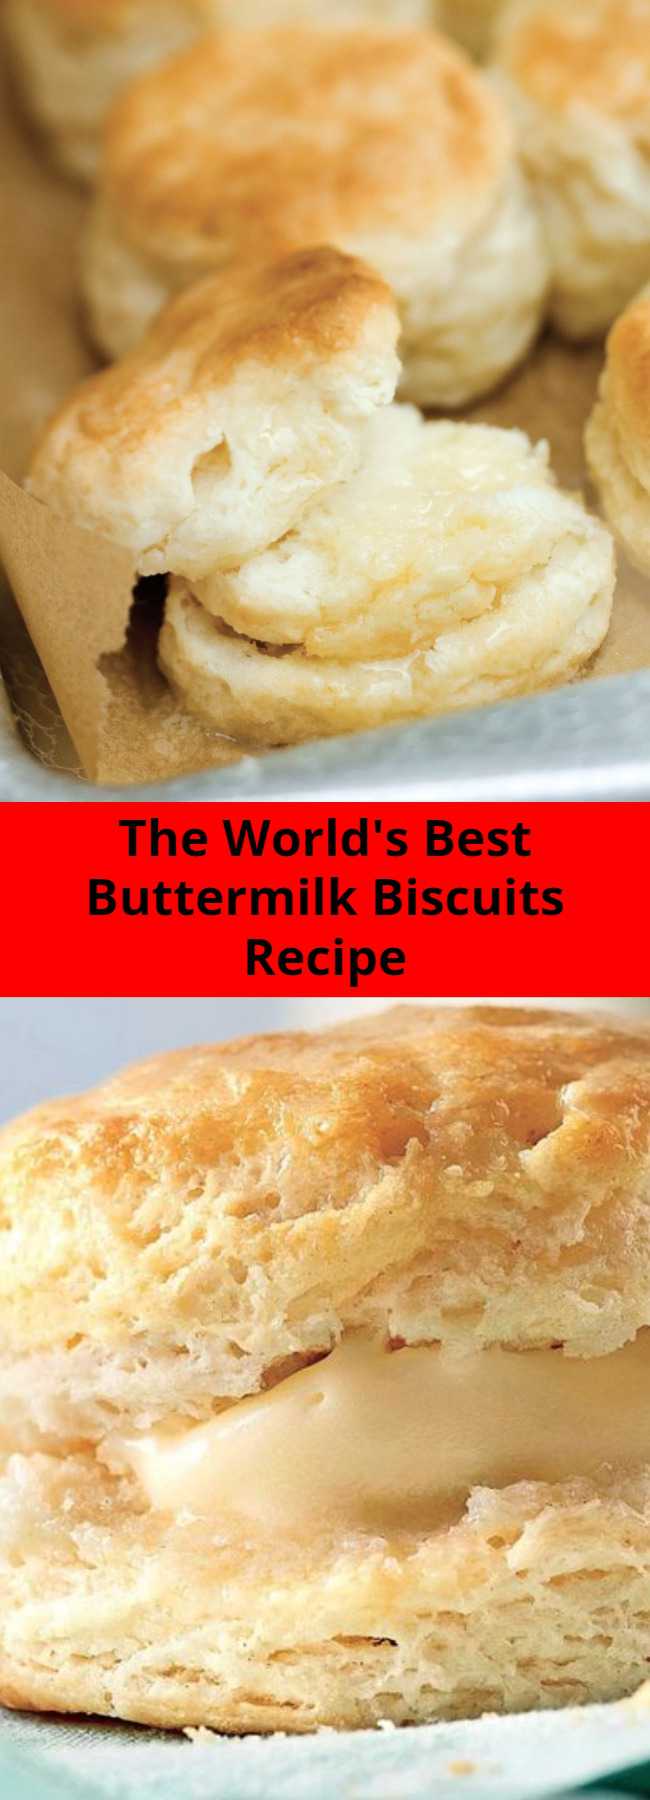 The World's Best Buttermilk Biscuits Recipe - This no-fail biscuit recipe will make you look like a pro, even if this is your first attempt at biscuit-making. And if you’re looking for something a little beyond a basic biscuit, try one of our delicious variations. However you make them, you’ll be rewarded with layer upon buttery layer of biscuit perfection. #buttermilkbiscuits